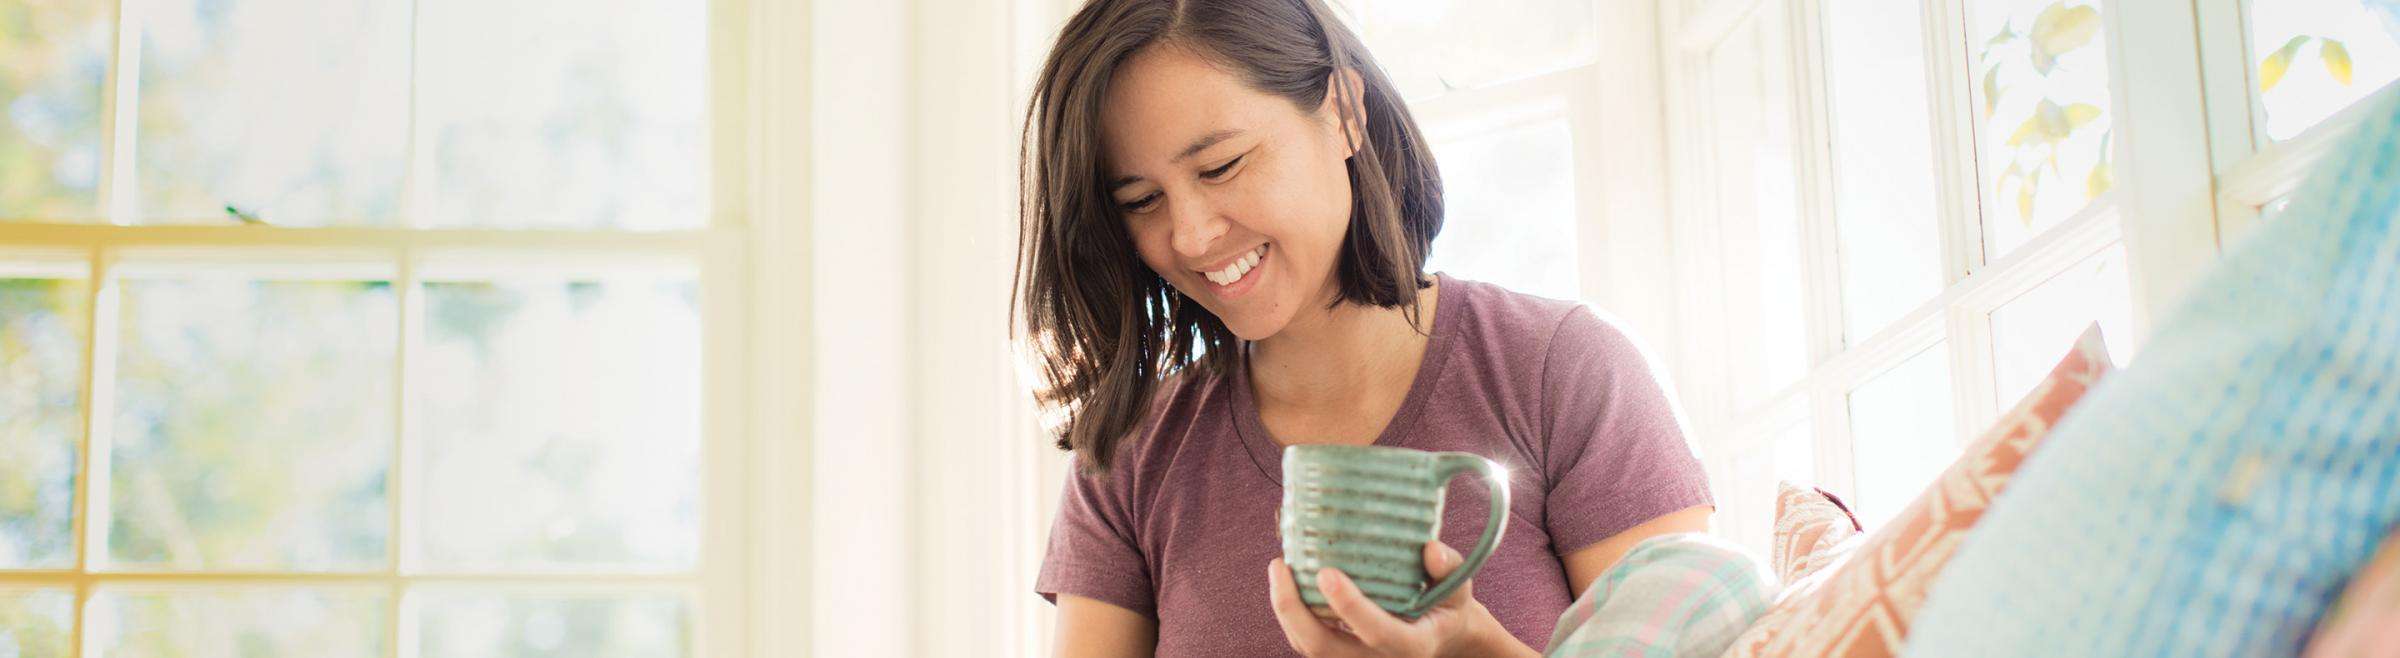 Woman drinking coffee and smiling in bright living room